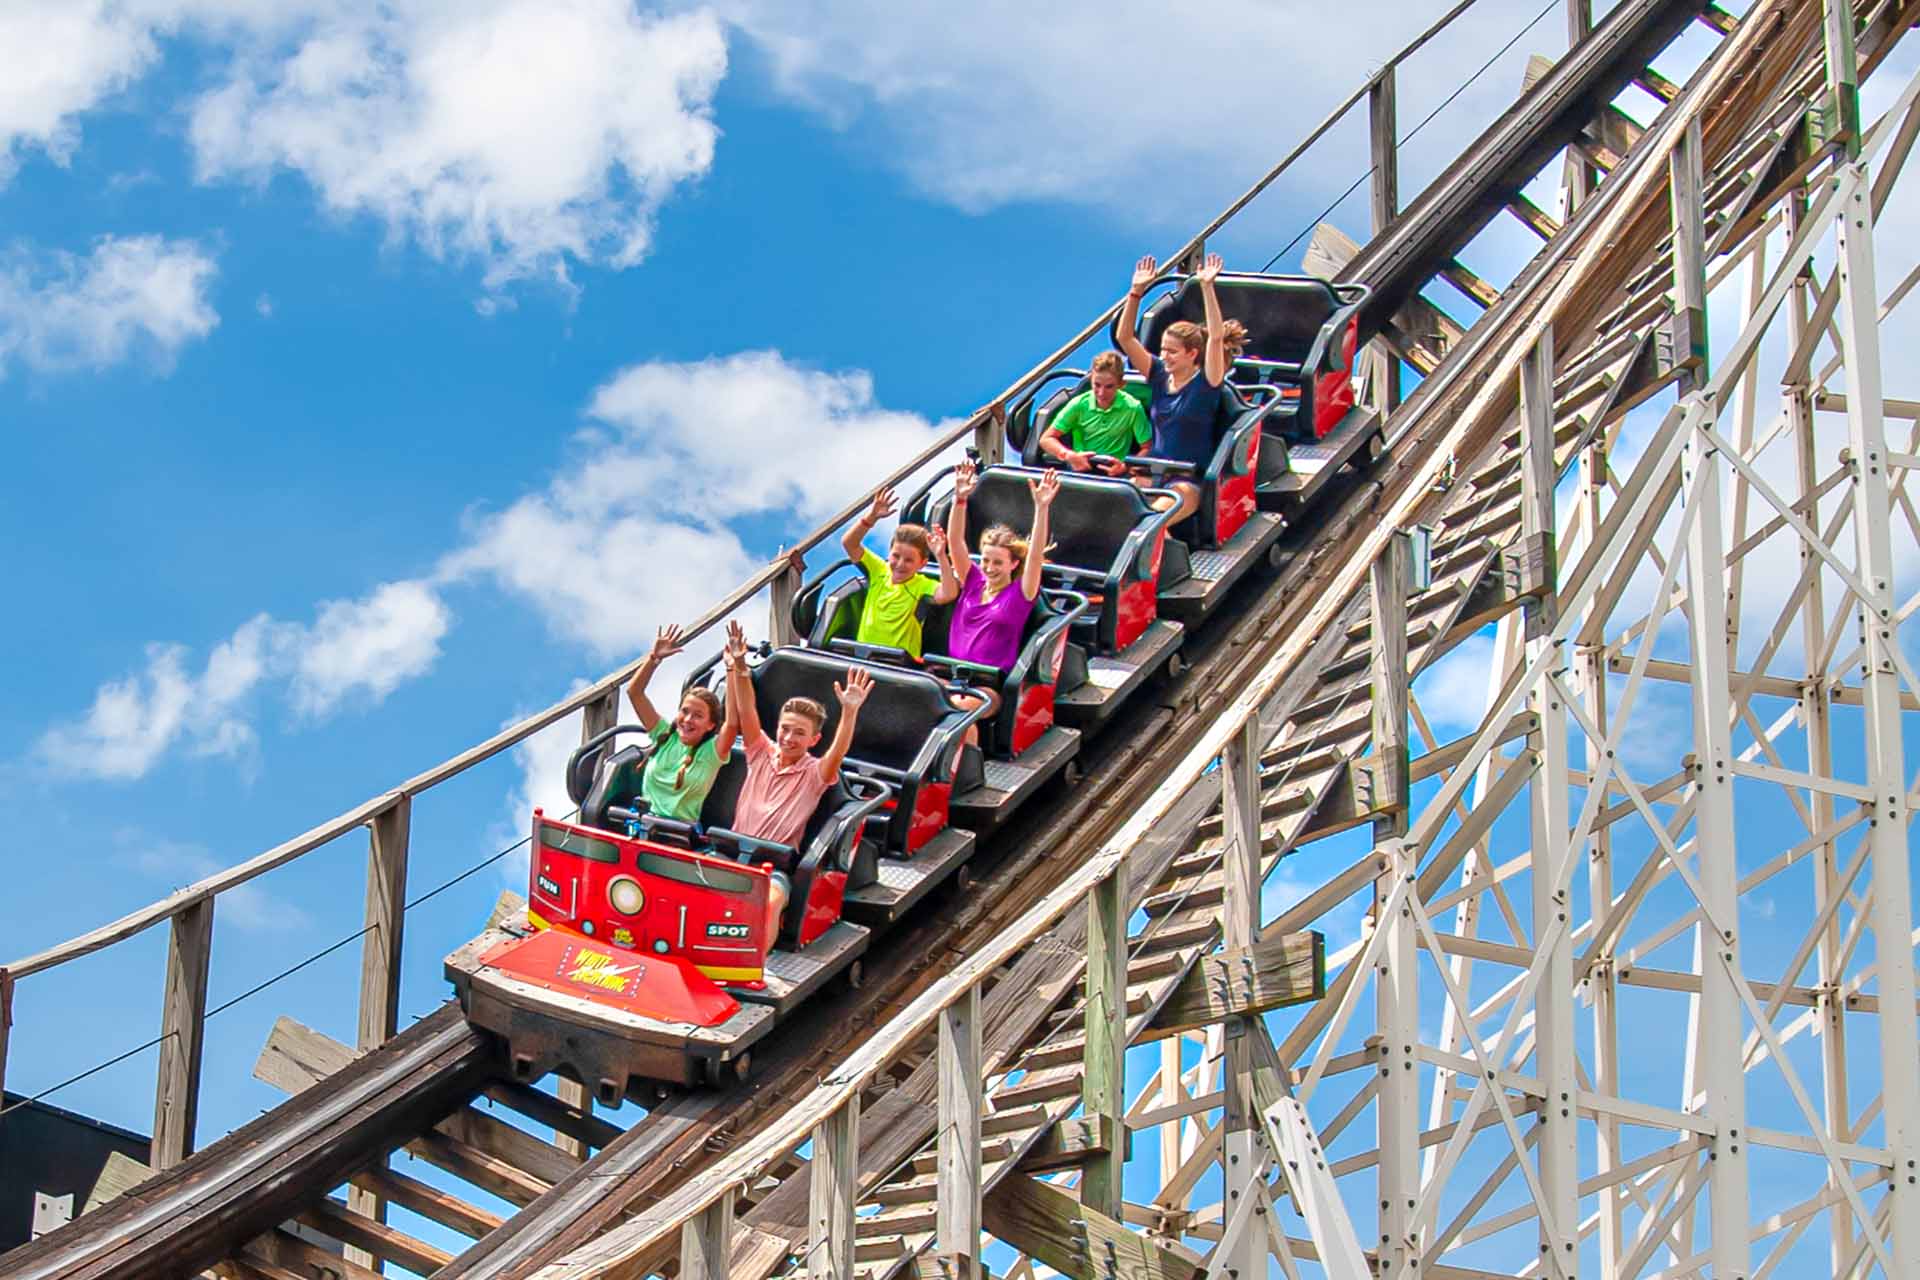 Group riding the White Lightning wooden roller coaster at Fun Spot America in Orlando